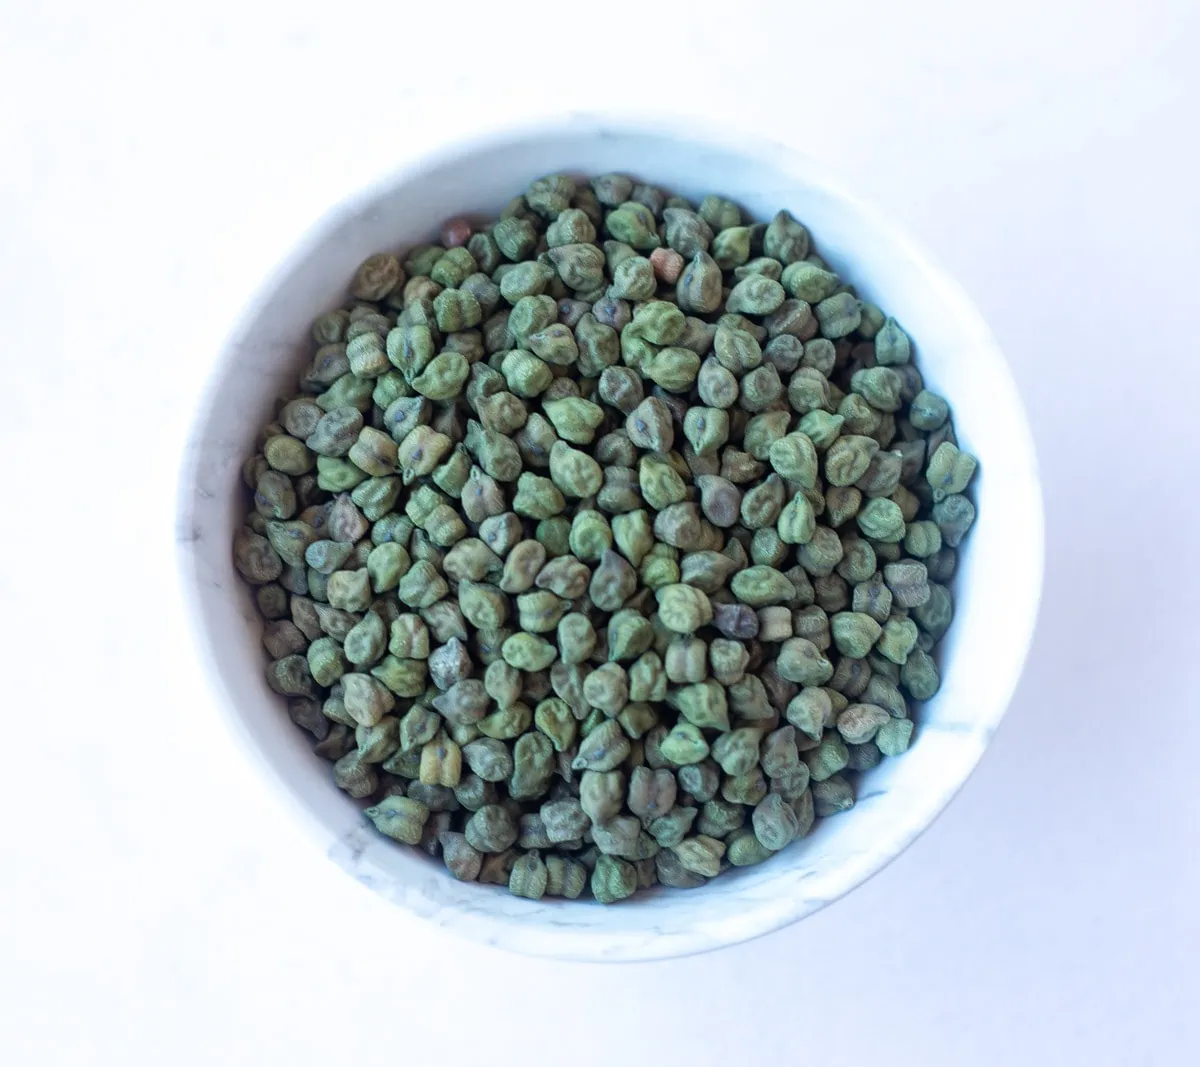 Dried Green Chickpeas, also called Hara Chana in a white bowl 